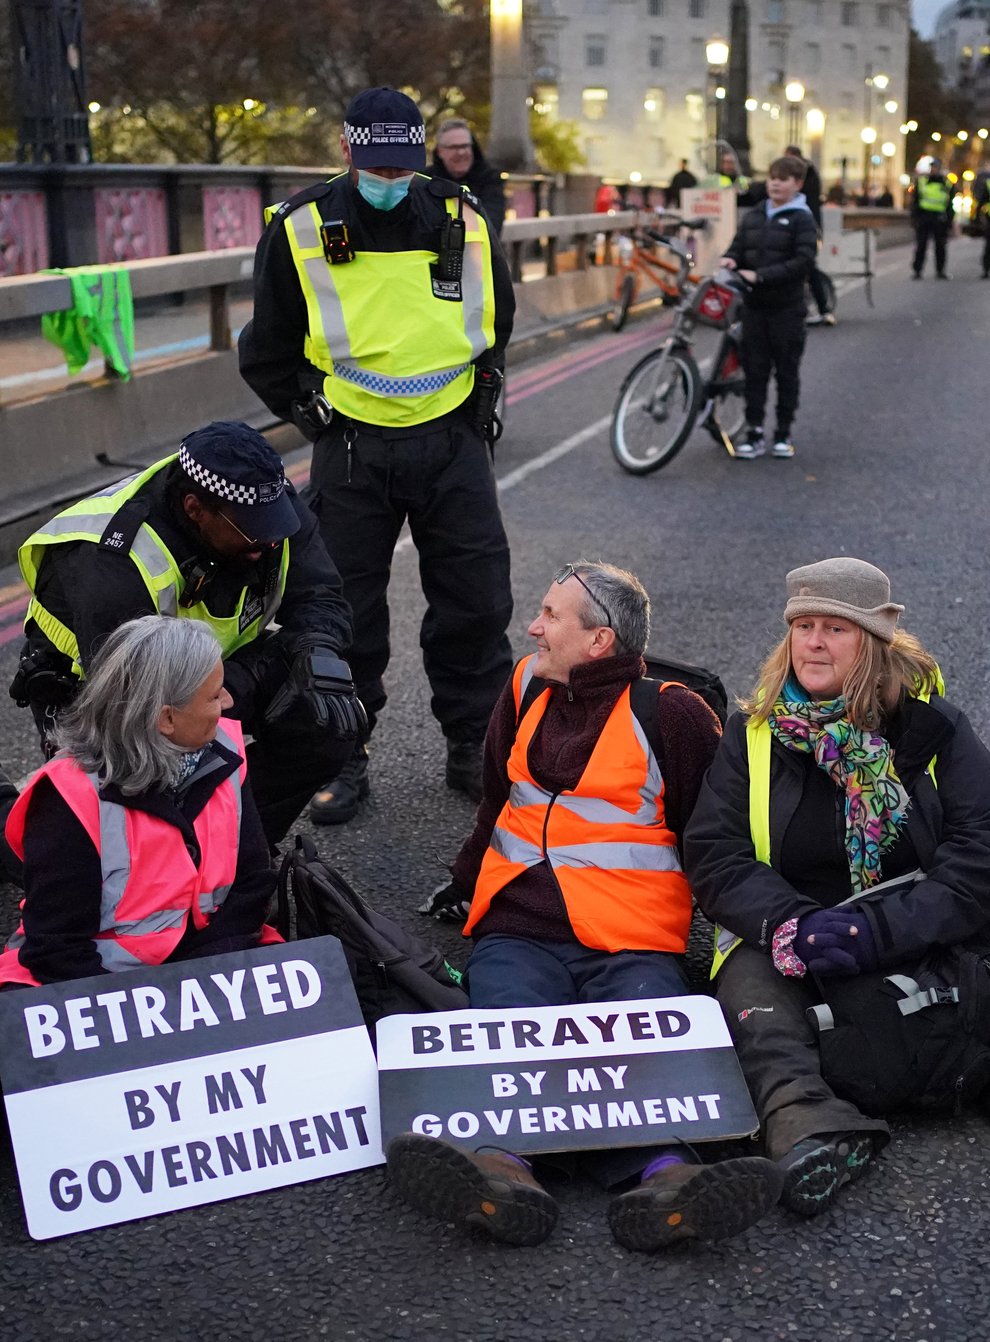 Supporters of the nine jailed Insulate Britain climate activists take part in a demonstration on Lambeth Bridge (Dominic Lipinski/PA)